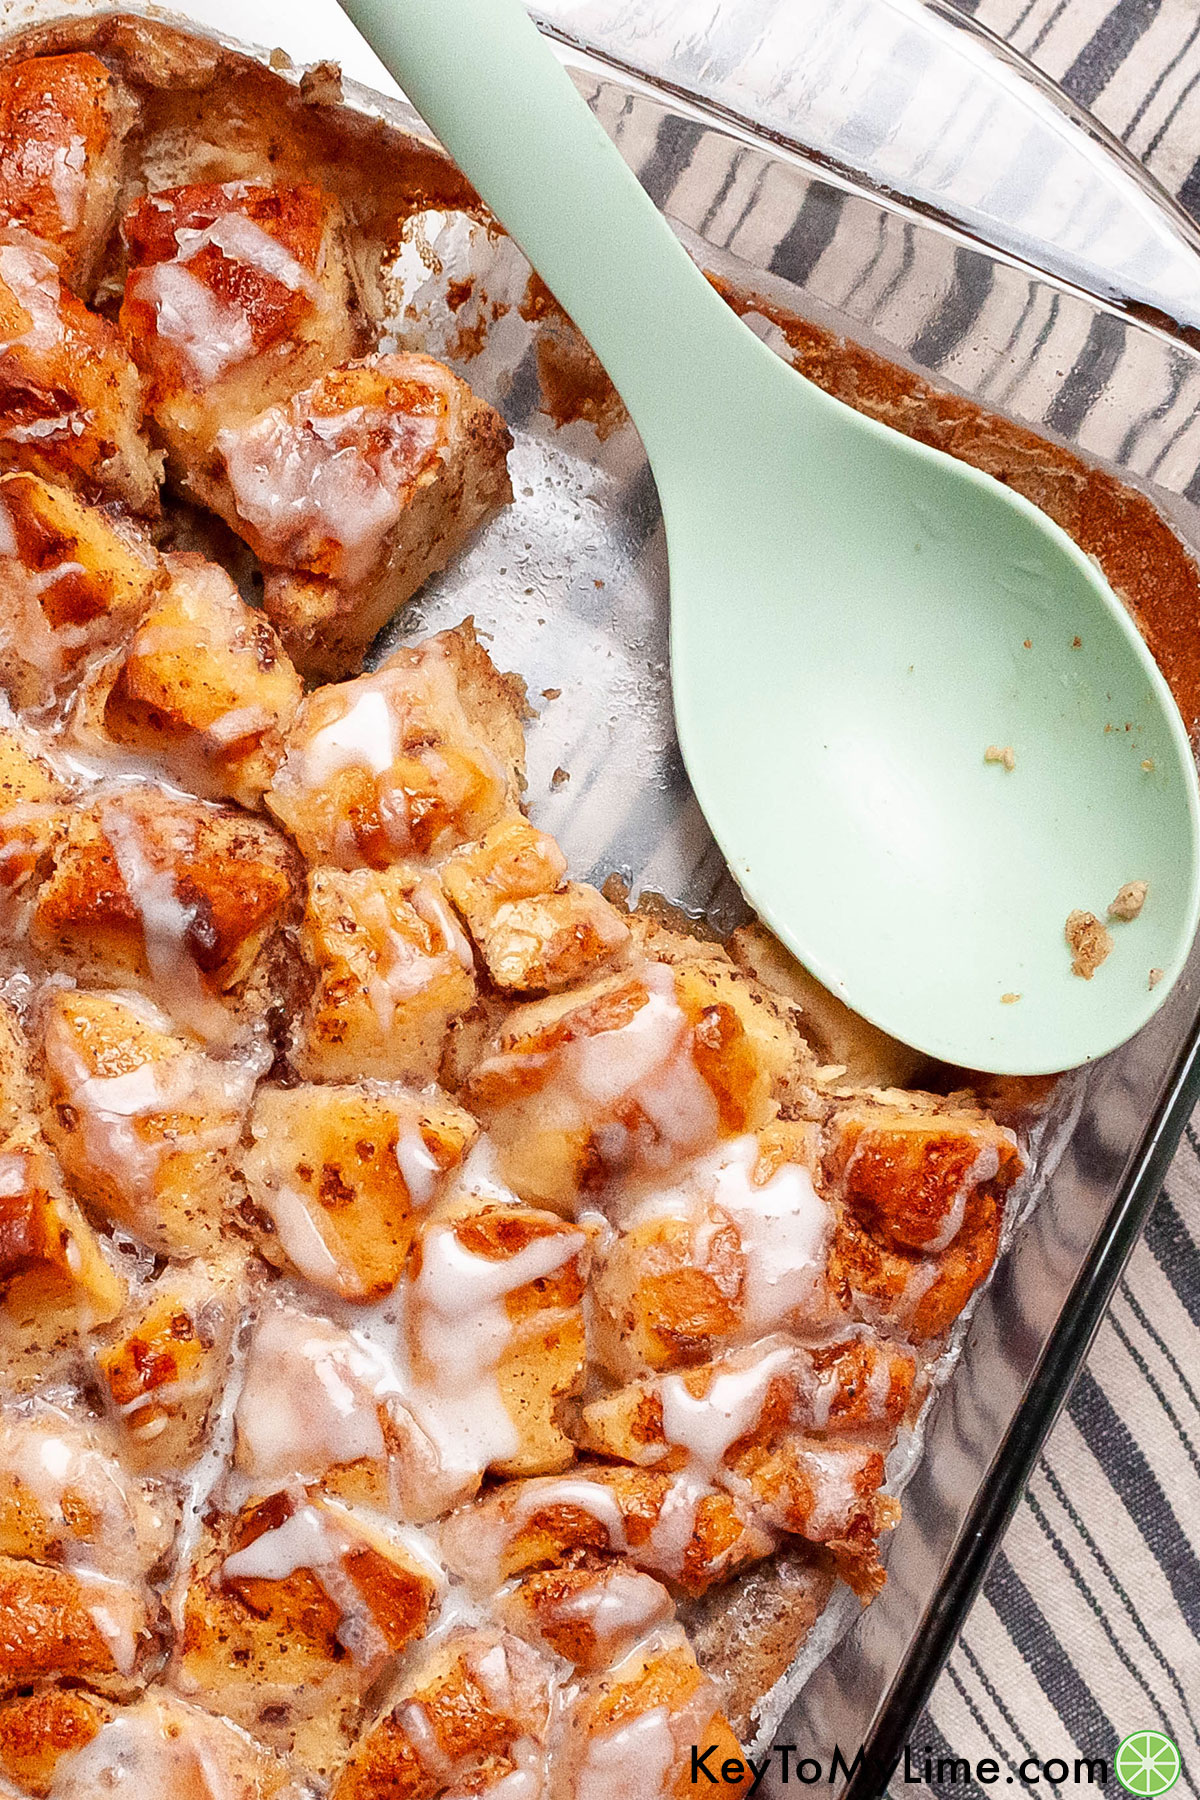 A cinnamon roll casserole dish with a large serving spoon inside.